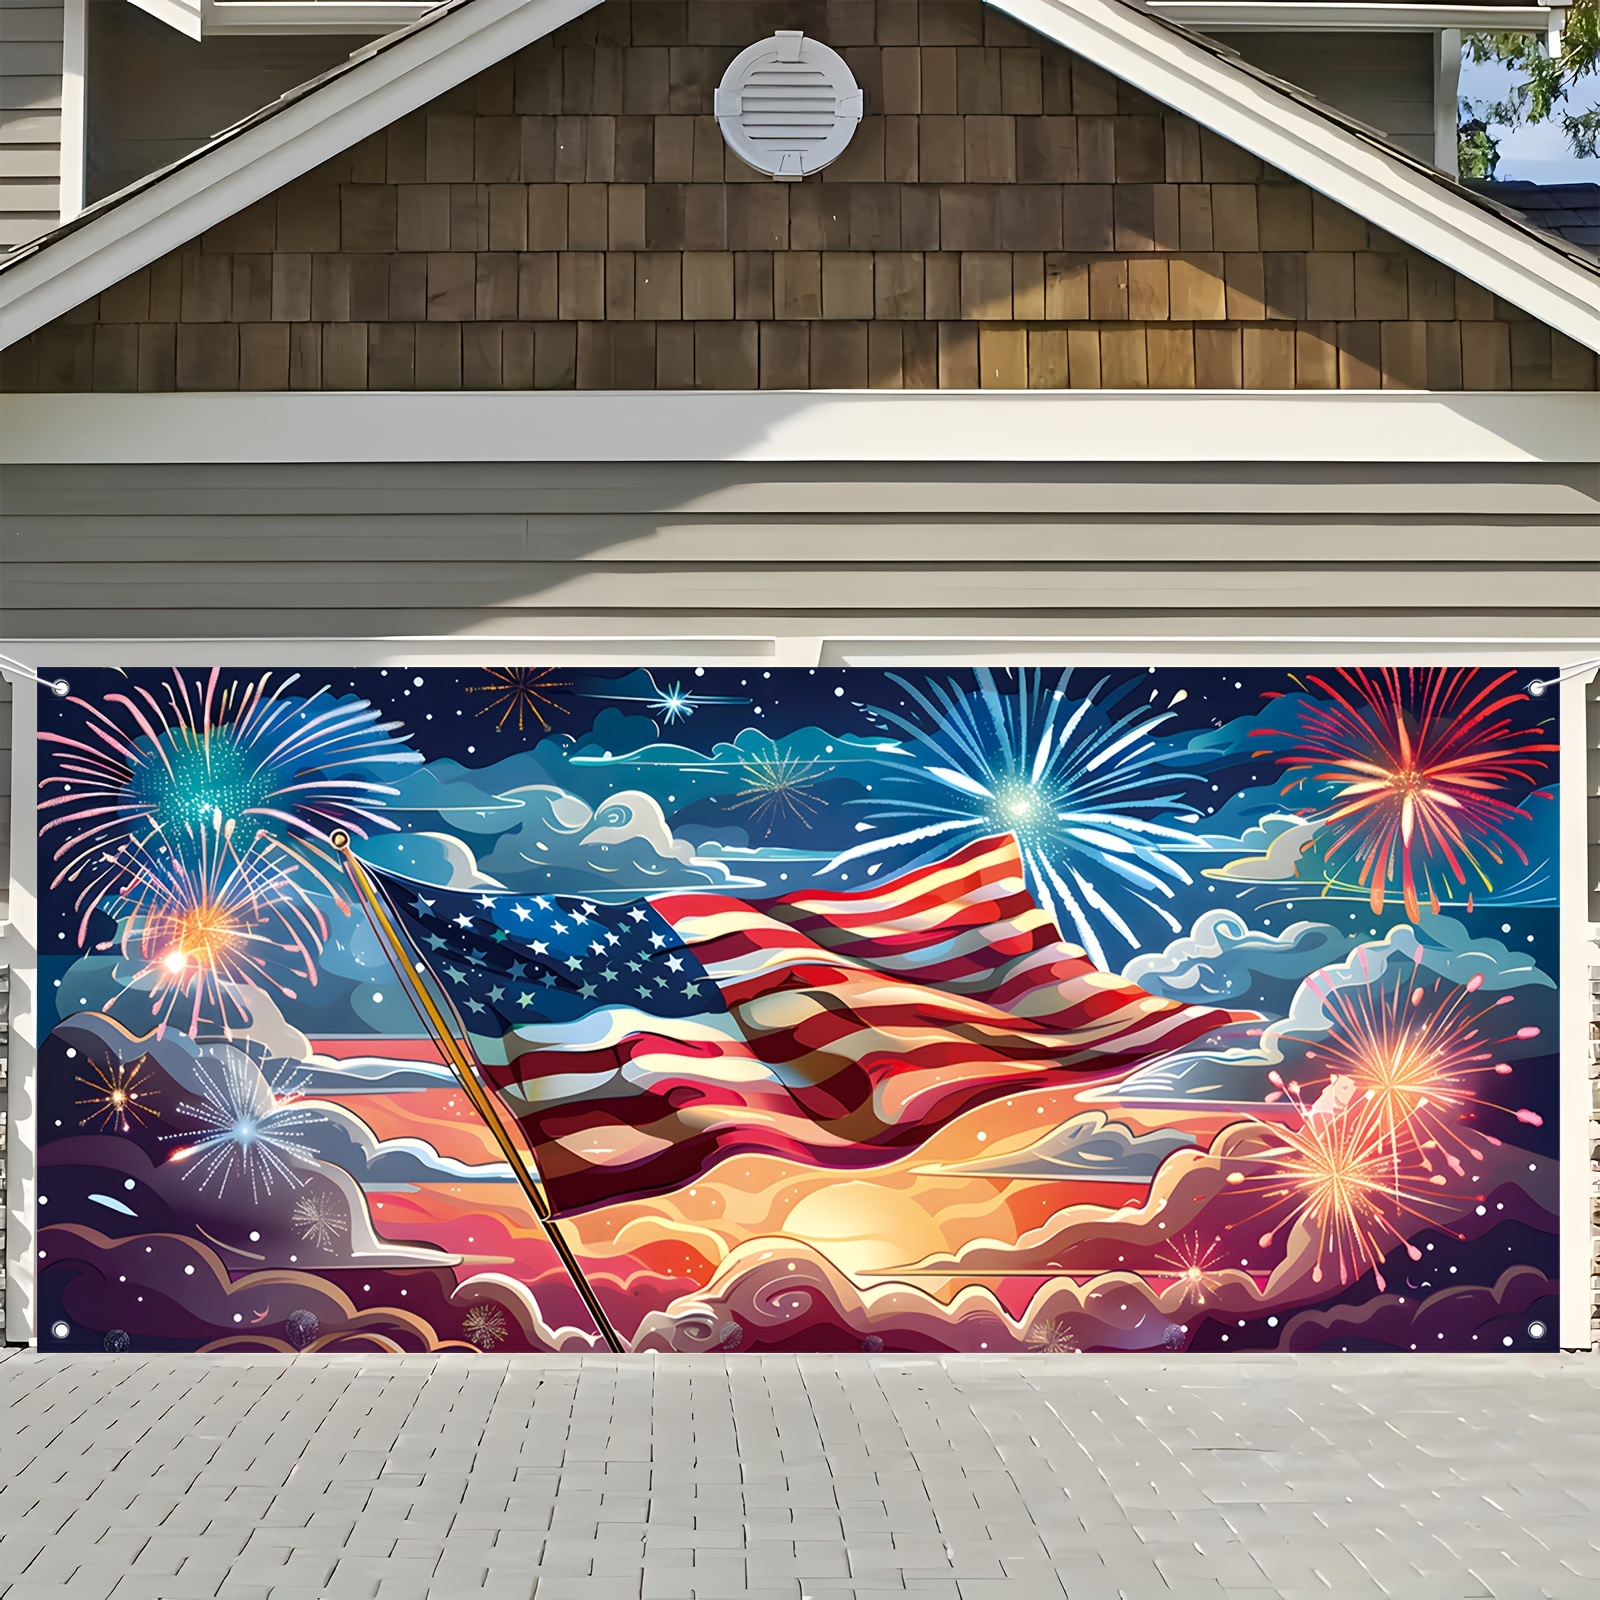 

4th Of July Patriotic Garage Door Banner - American Flag & Fireworks Design, Red & Blue, Durable Polyester, 71''x157'', Perfect For Independence Day Outdoor Decor